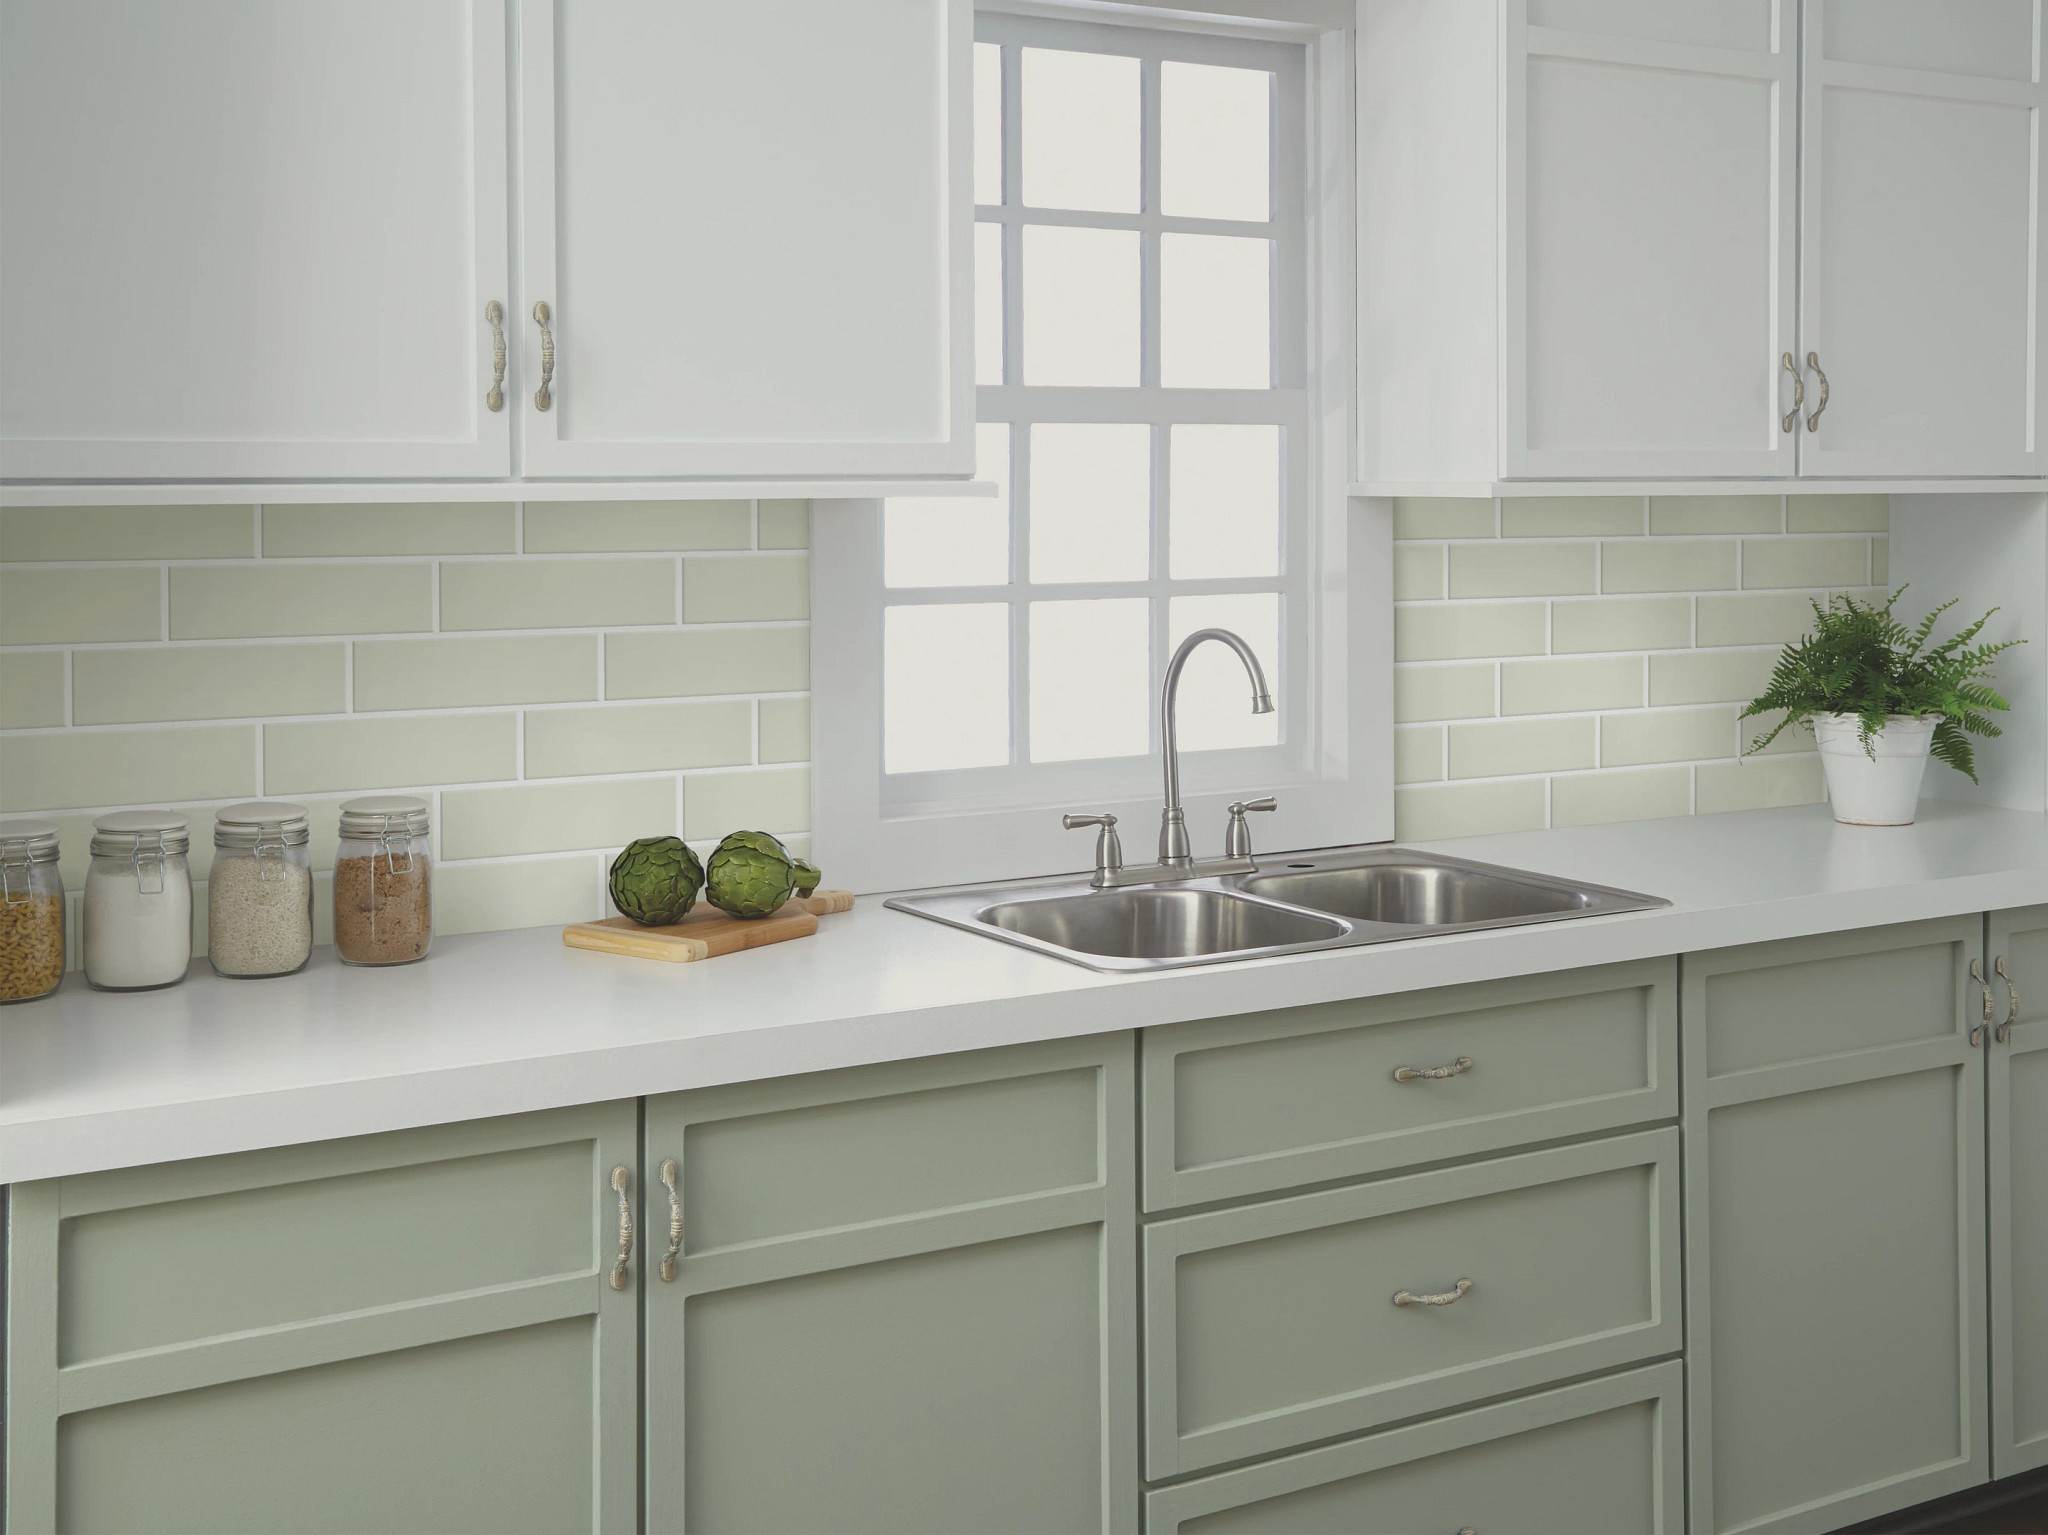 Kitchen cabinets | About Floors N' More